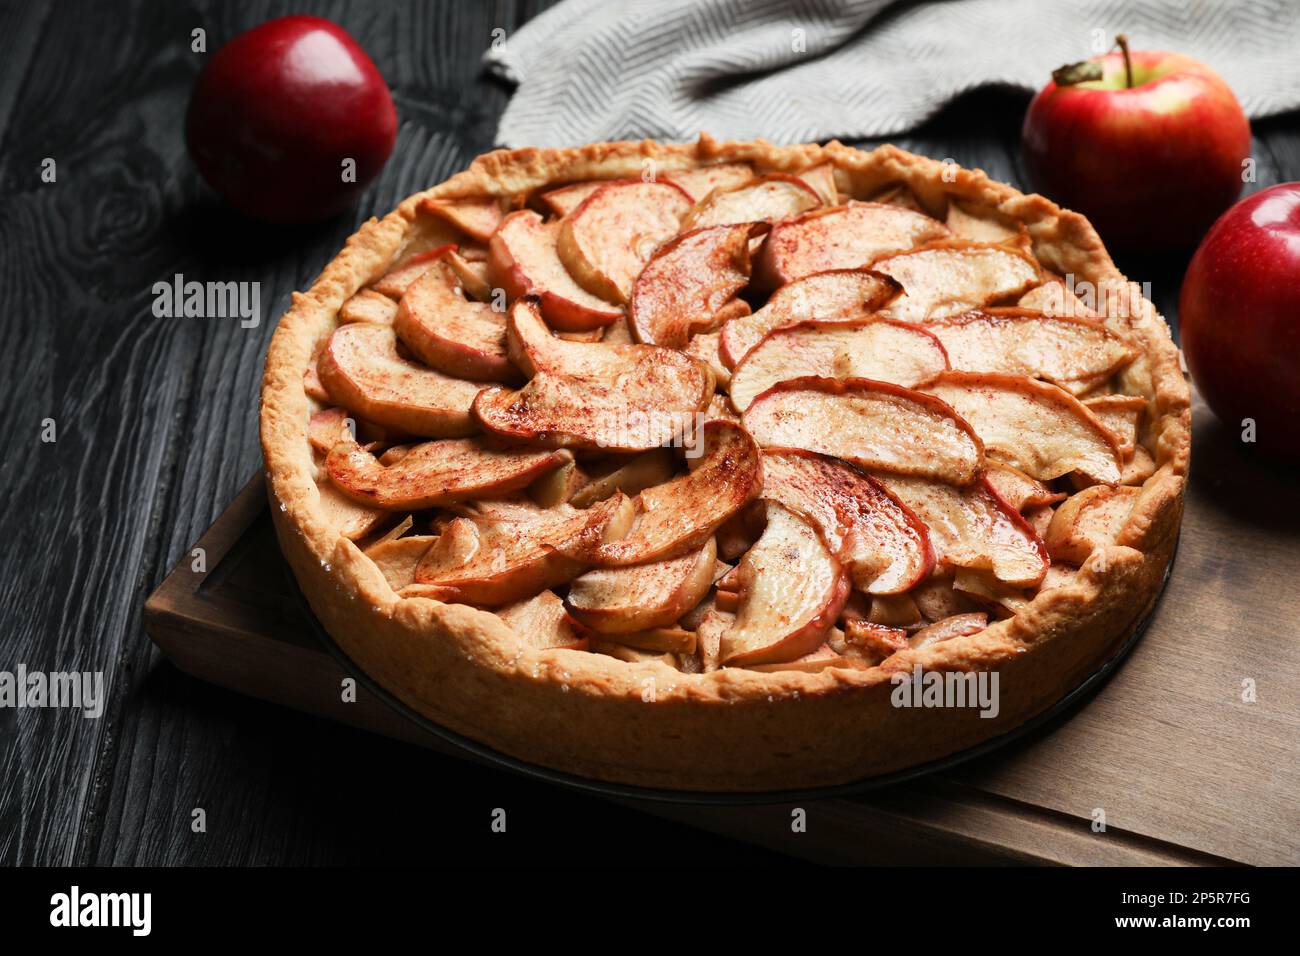 Delicious apple pie and fresh fruits on black wooden table Stock Photo